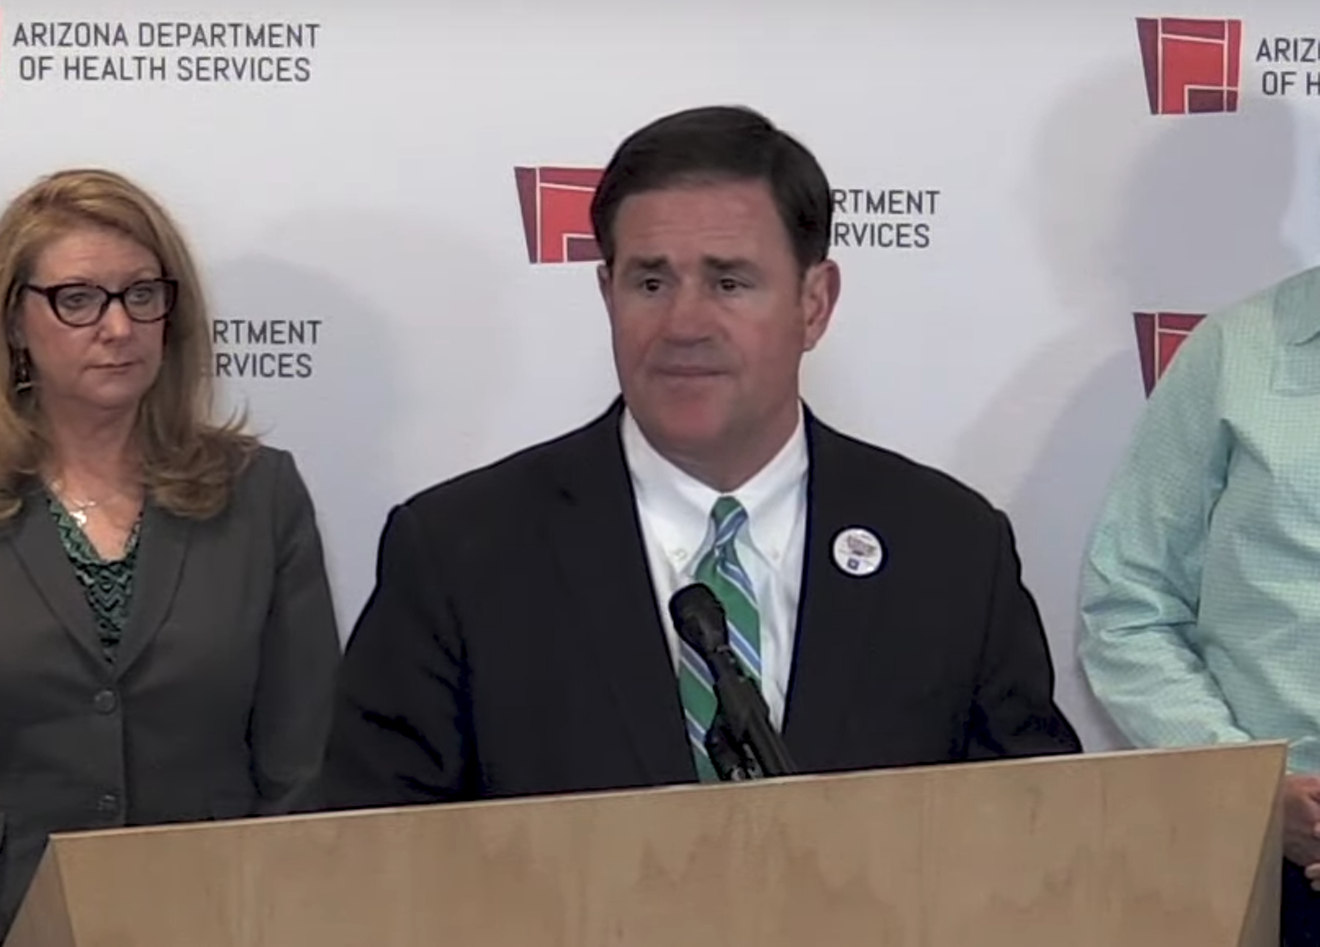 Arizona Governor Doug Ducey declares a state of emergency over the novel coronavirus on March 11, 2020.